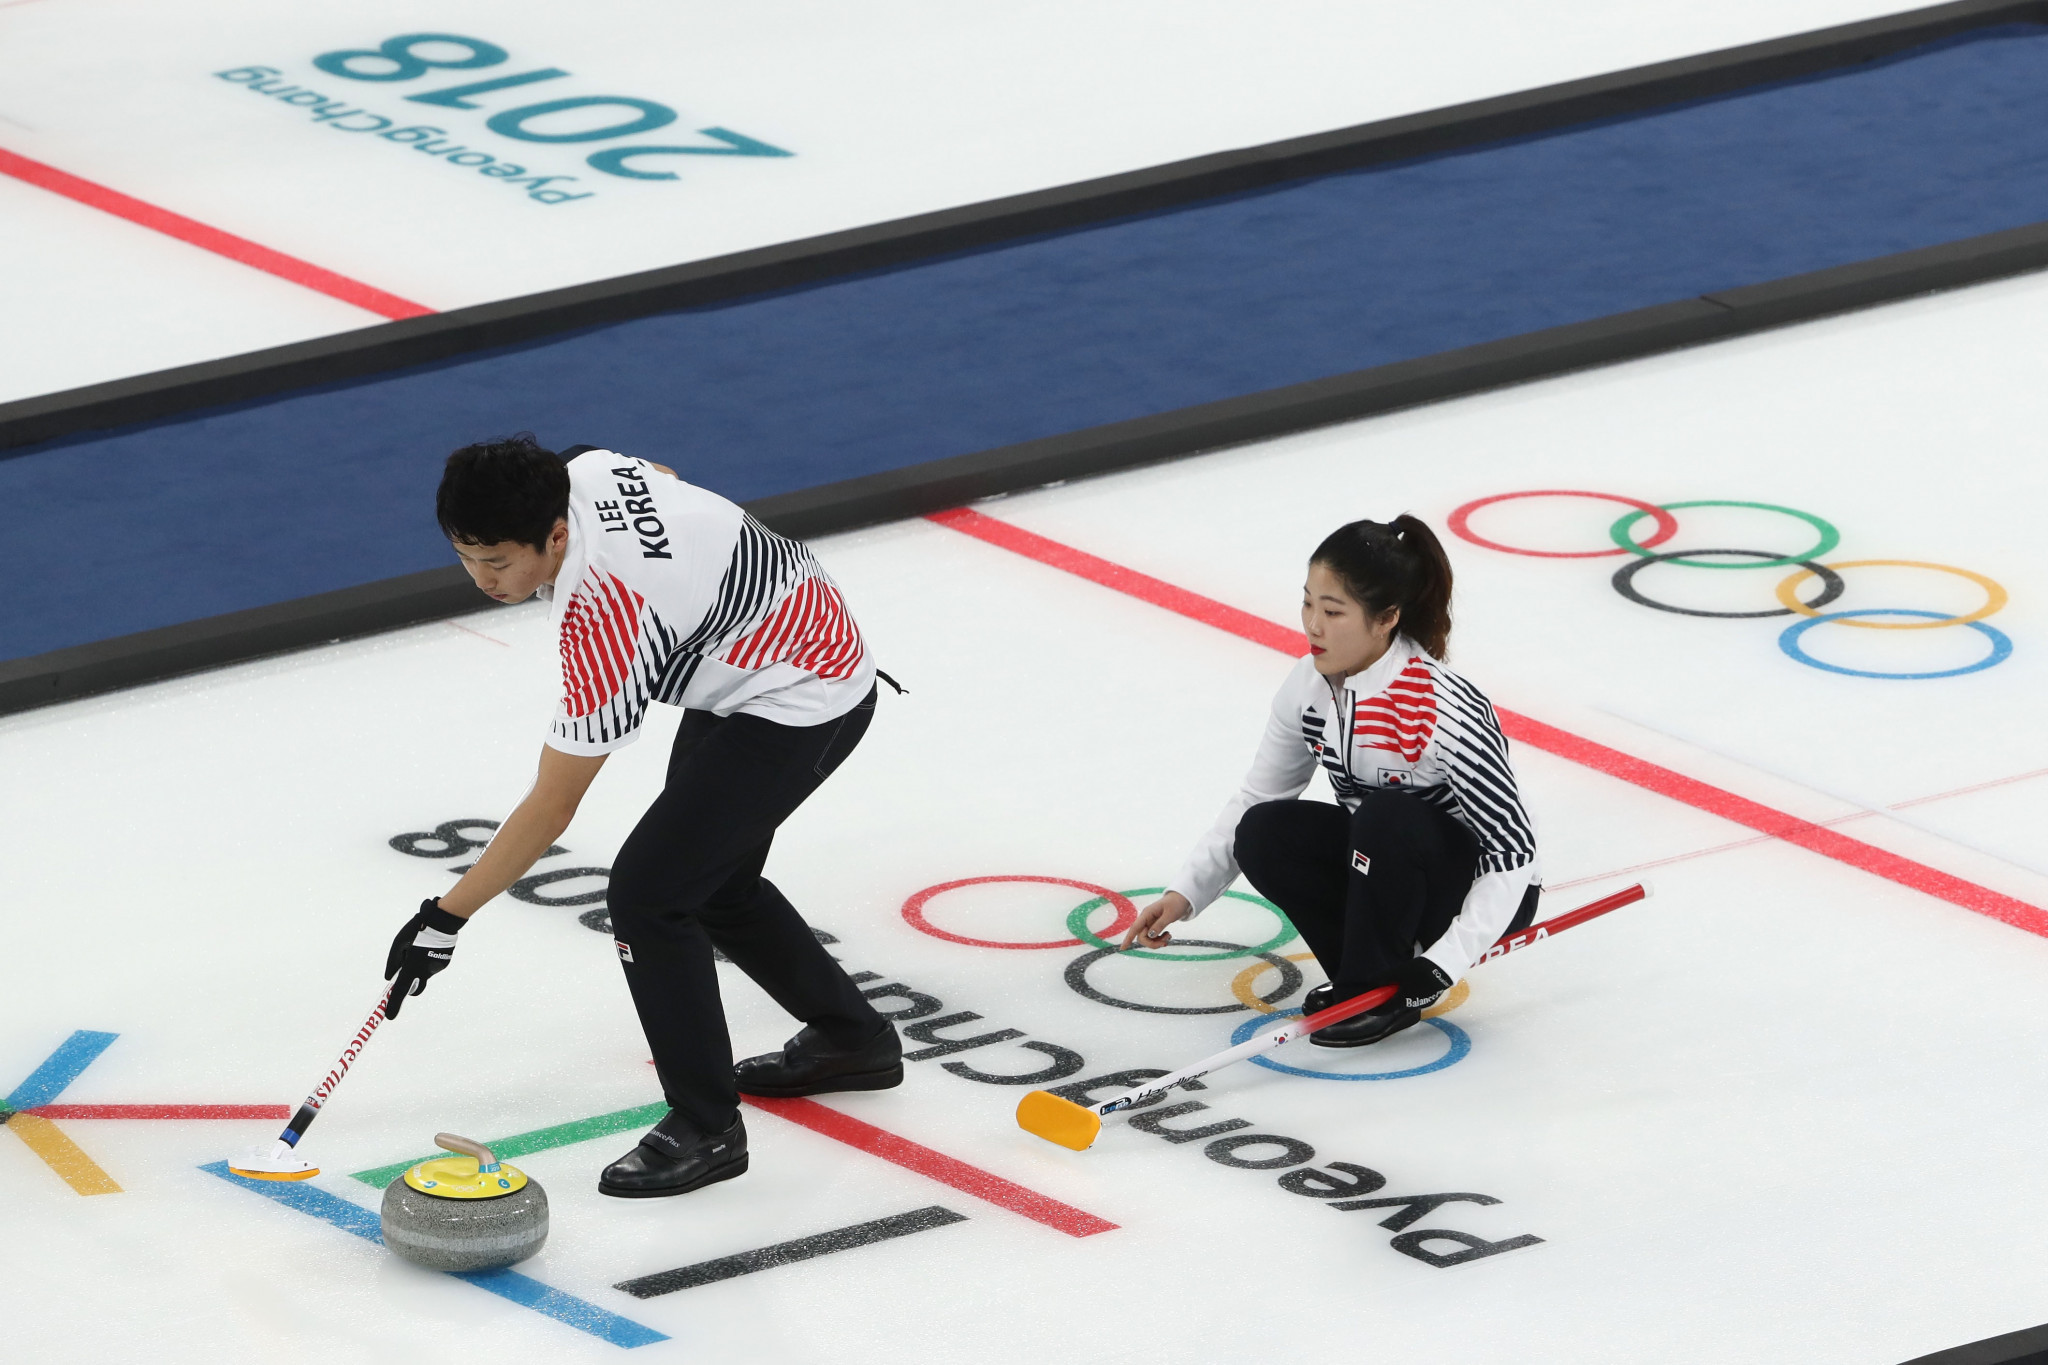 Former South Korean curling coach arrested on embezzlement charges